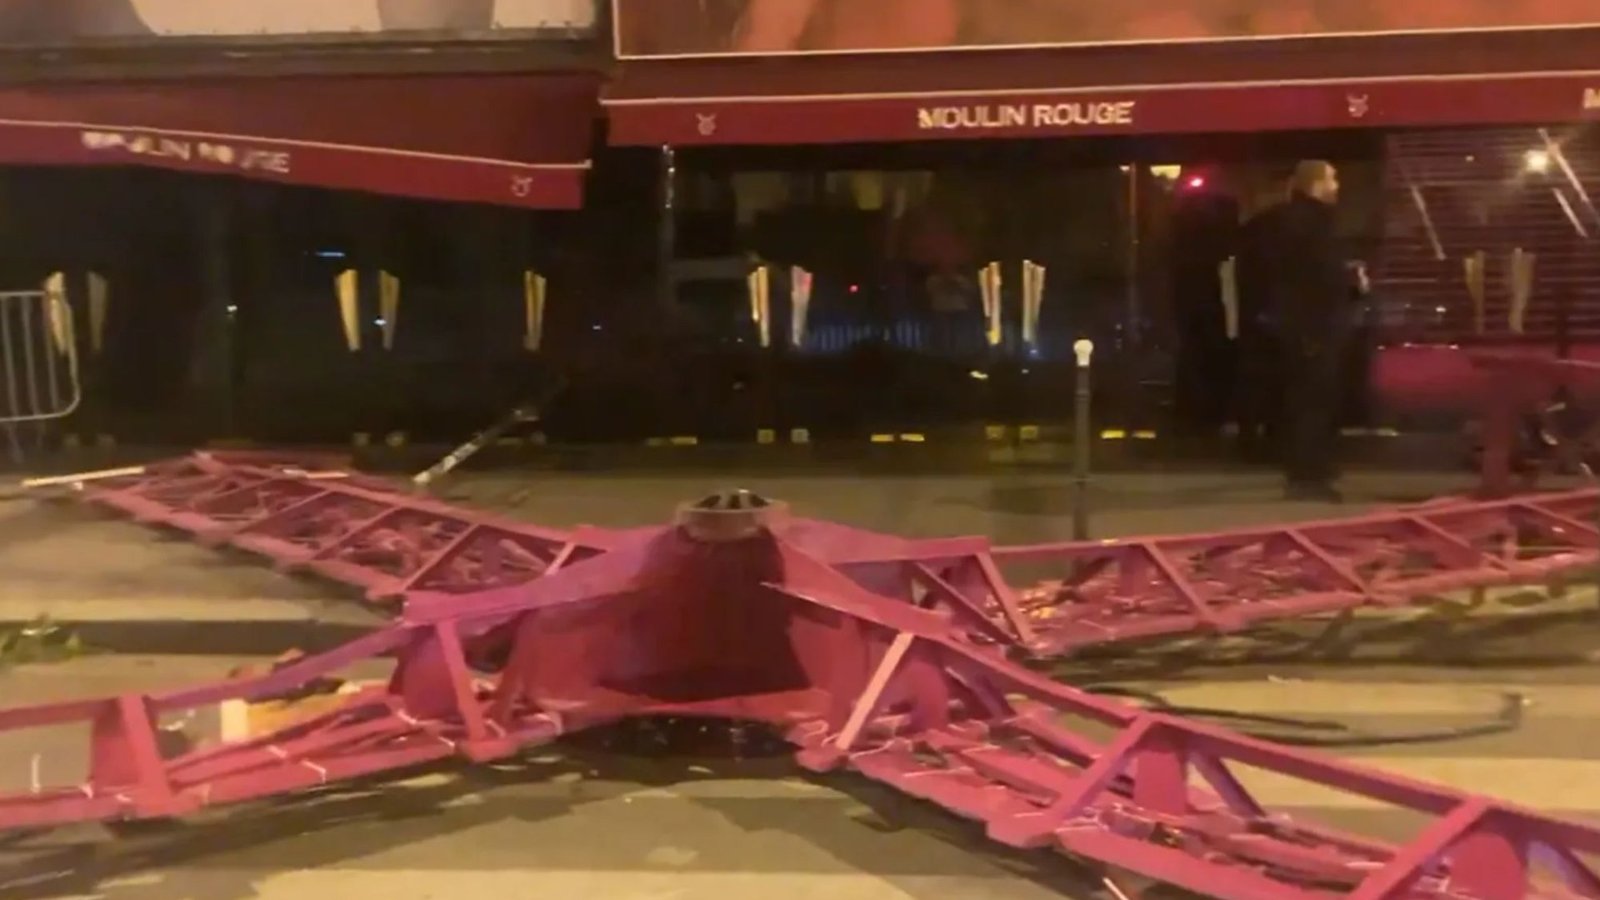 Sails on Moulin Rouge’s iconic windmill COLLAPSE crashing to the ground at world’s most famous cabaret club in Paris